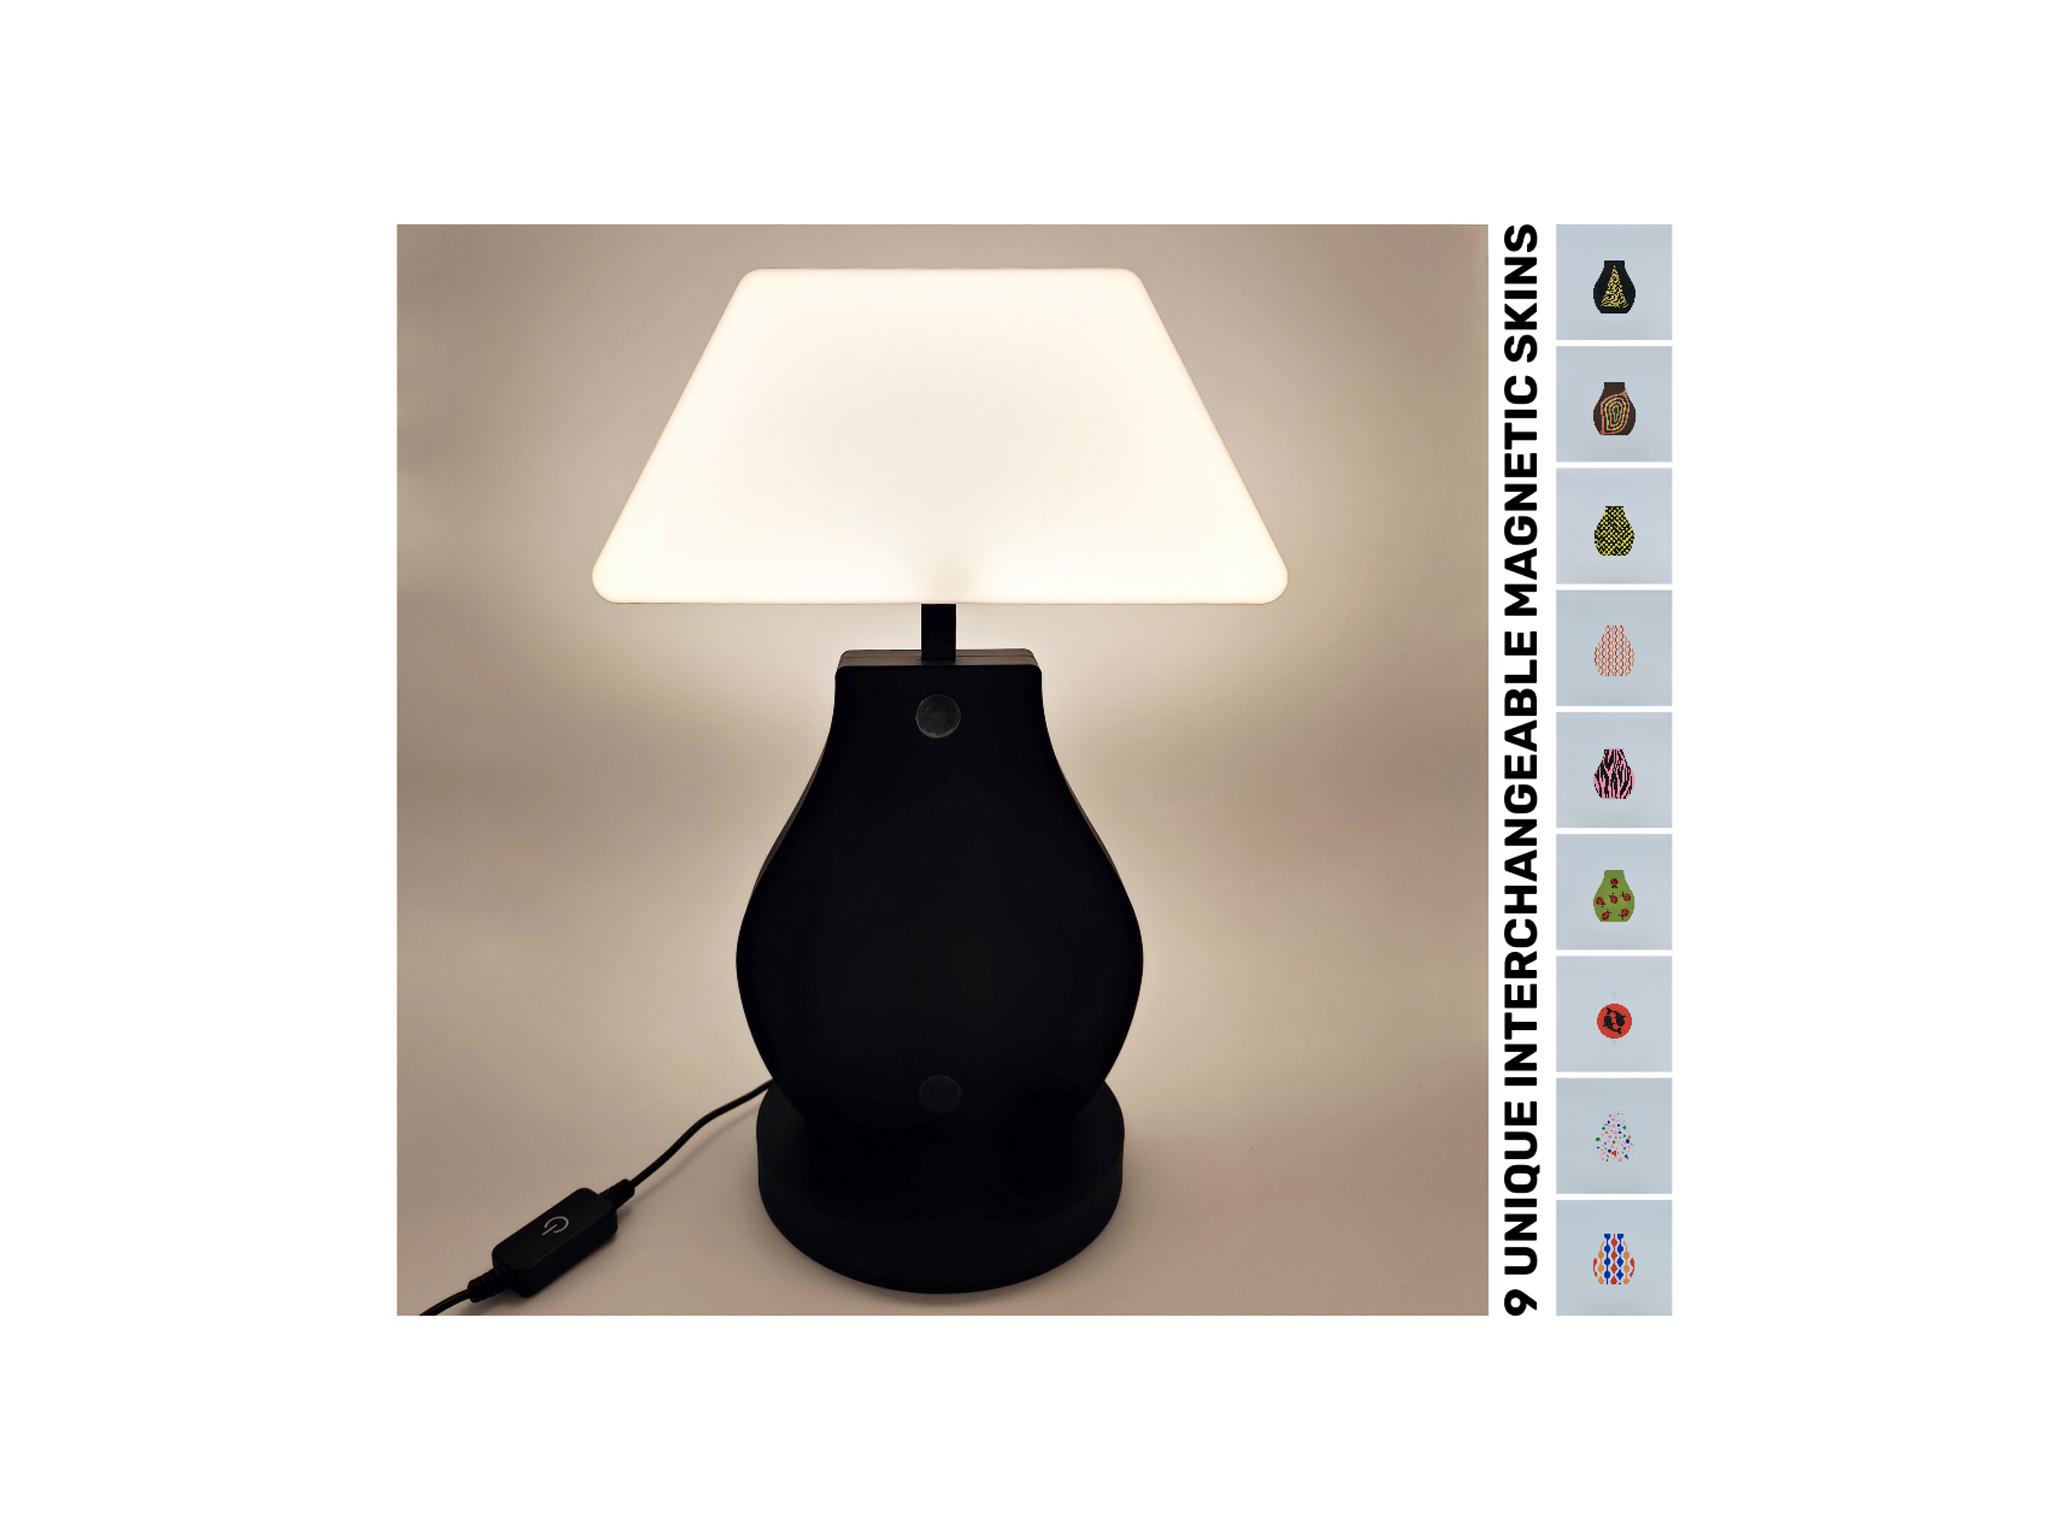 Bella - Led Lamp with interchangeable magnetic skins 3d model